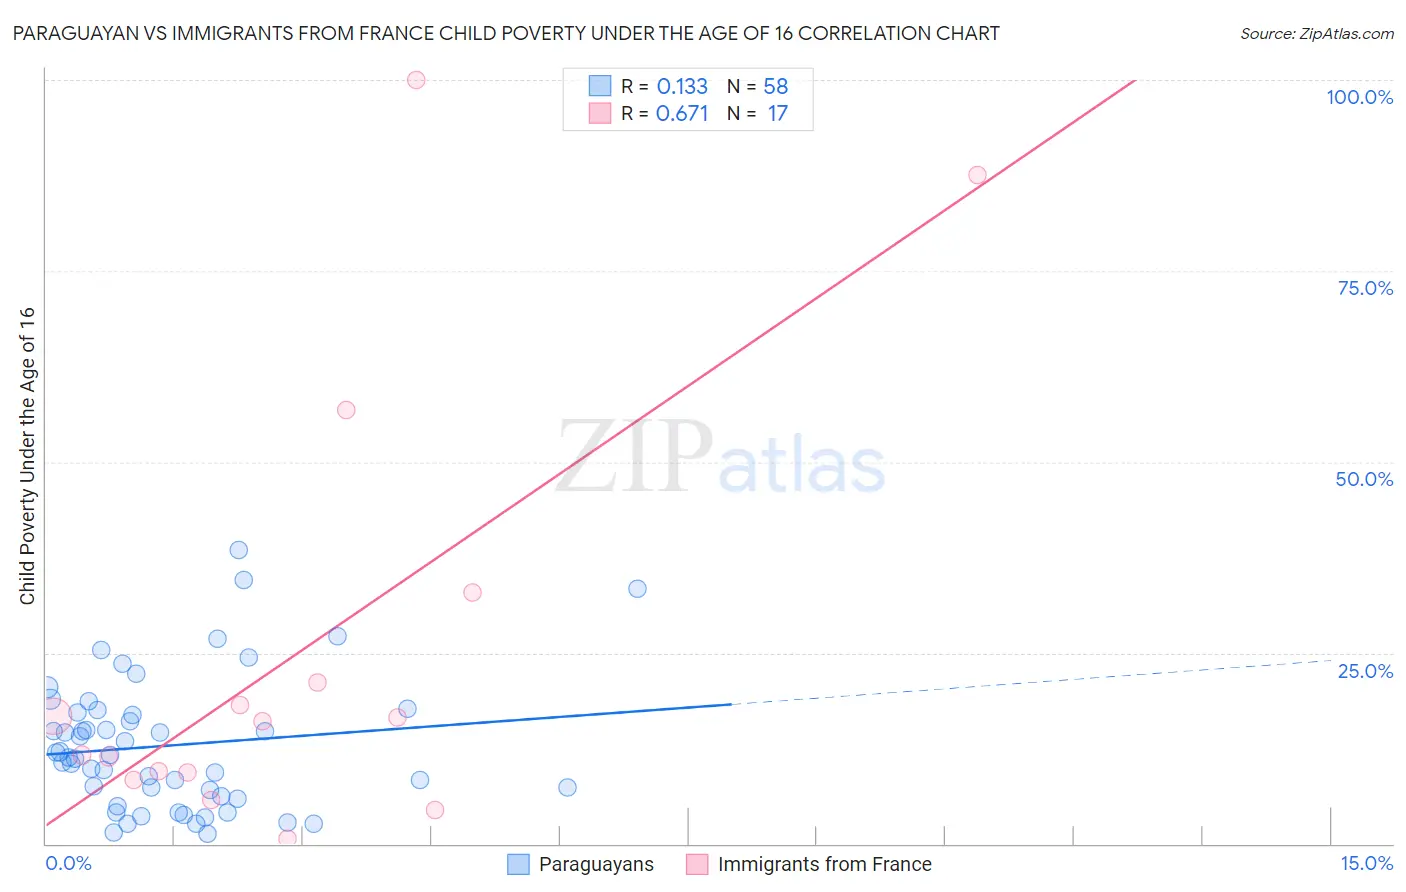 Paraguayan vs Immigrants from France Child Poverty Under the Age of 16